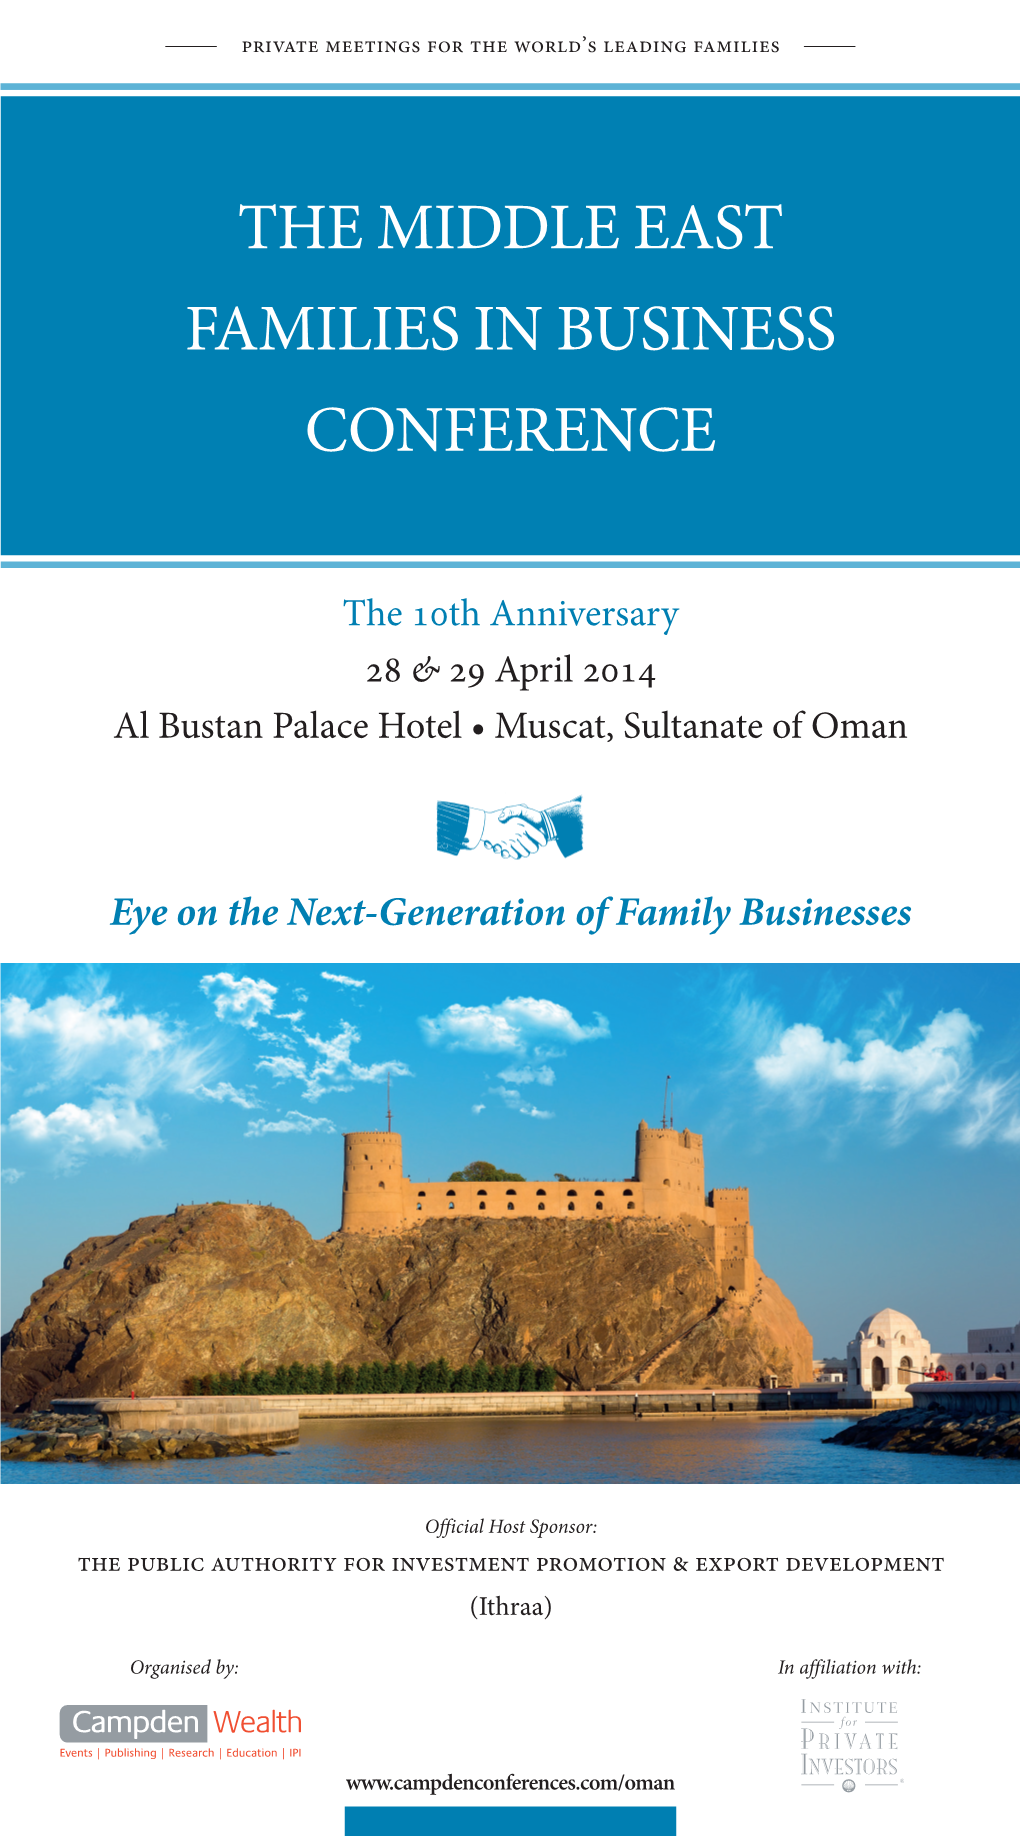 The Middle East Families in Business Conference